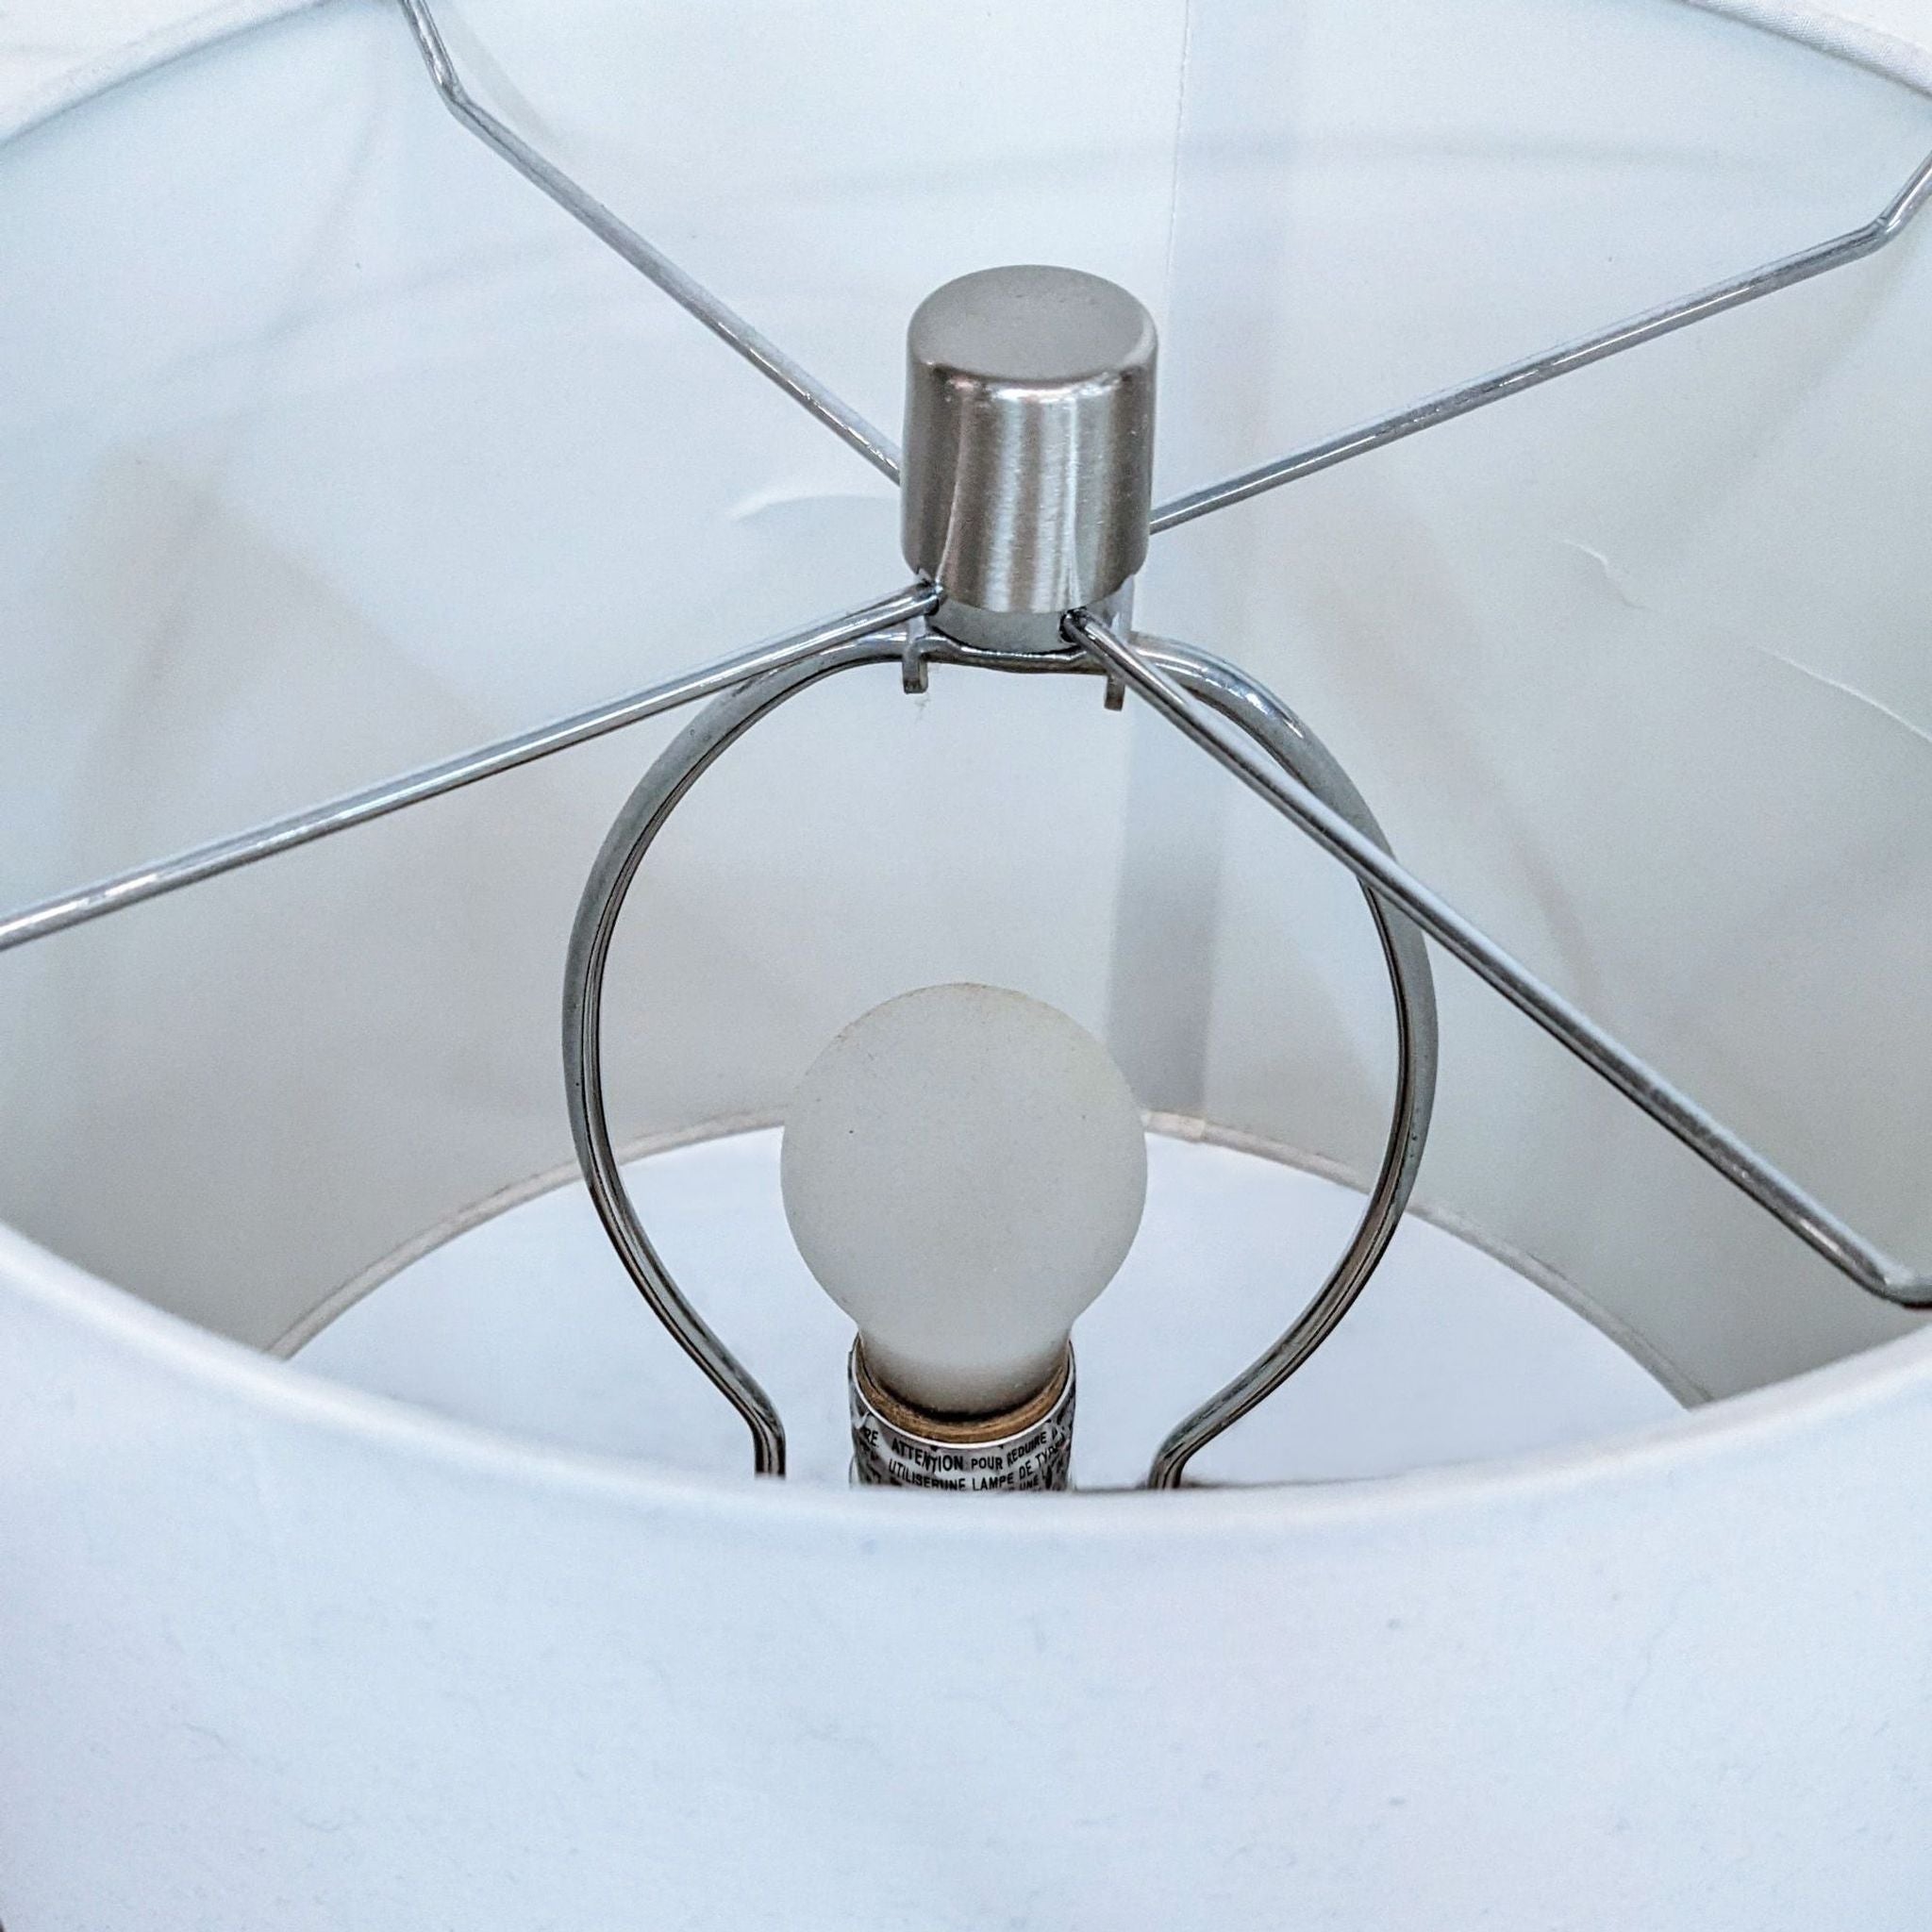 Interior view of a lampshade showing the bulb socket and metal frame on a Reperch lighting item.